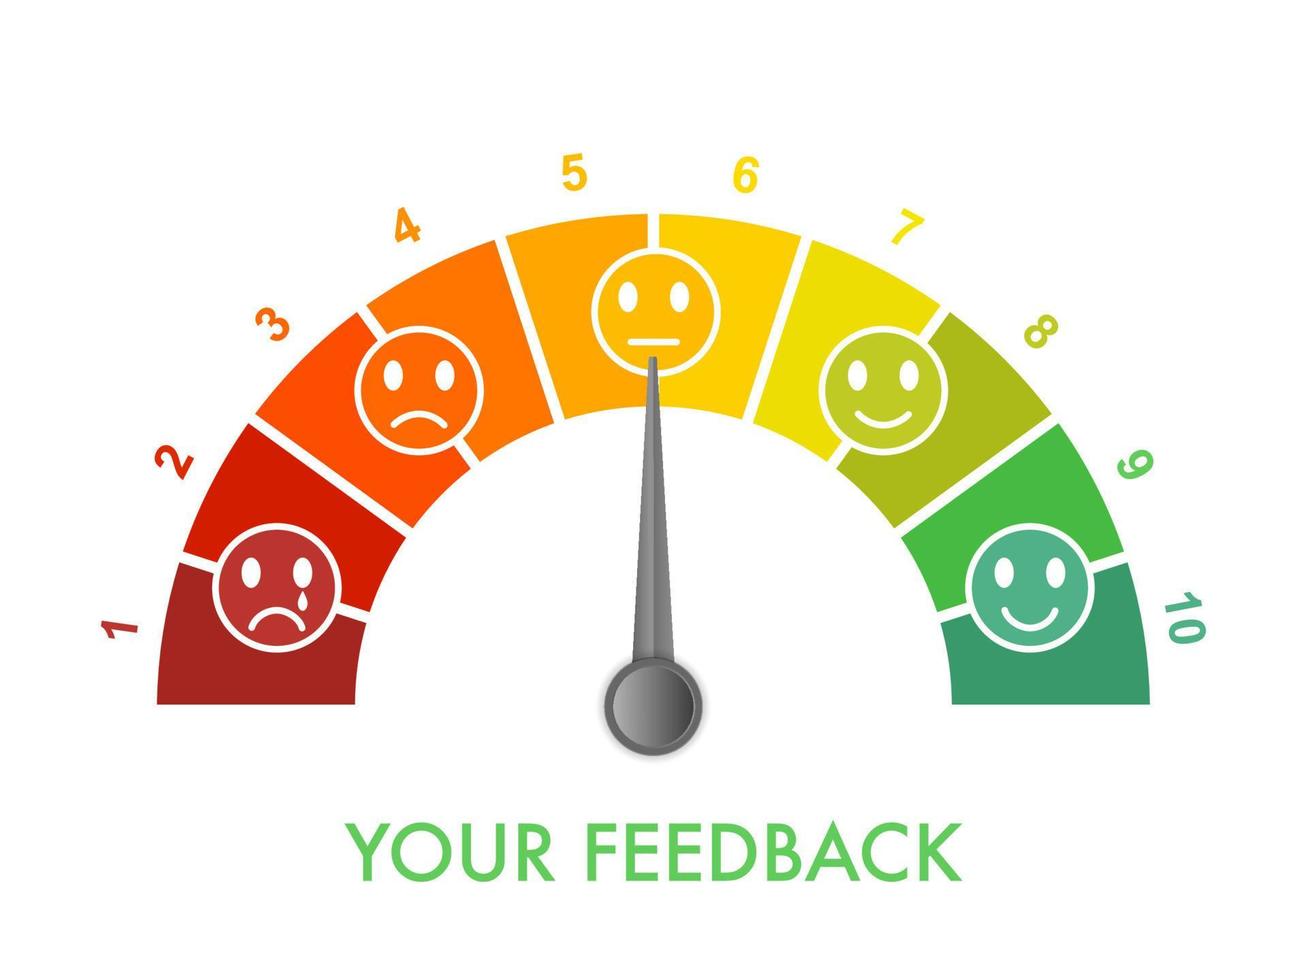 Customer feedback measurement scale 0 to 10, bad to great. Assessment management tool. Arch chart indicates client satisfaction. Vector illustration clipart